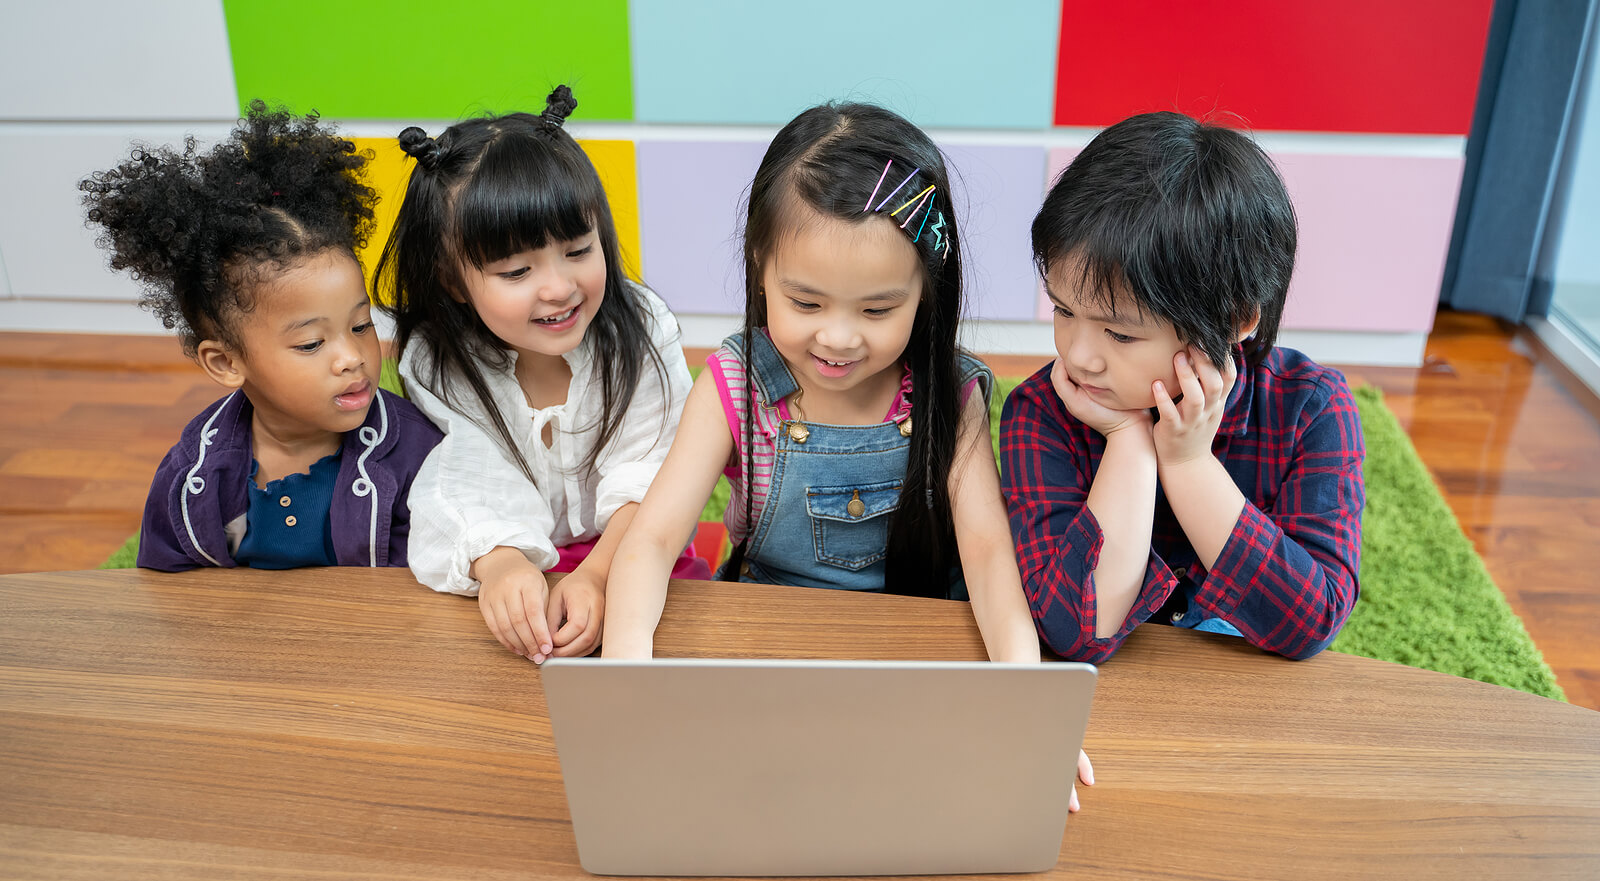 Four children sitting at a table looking at a laptop.